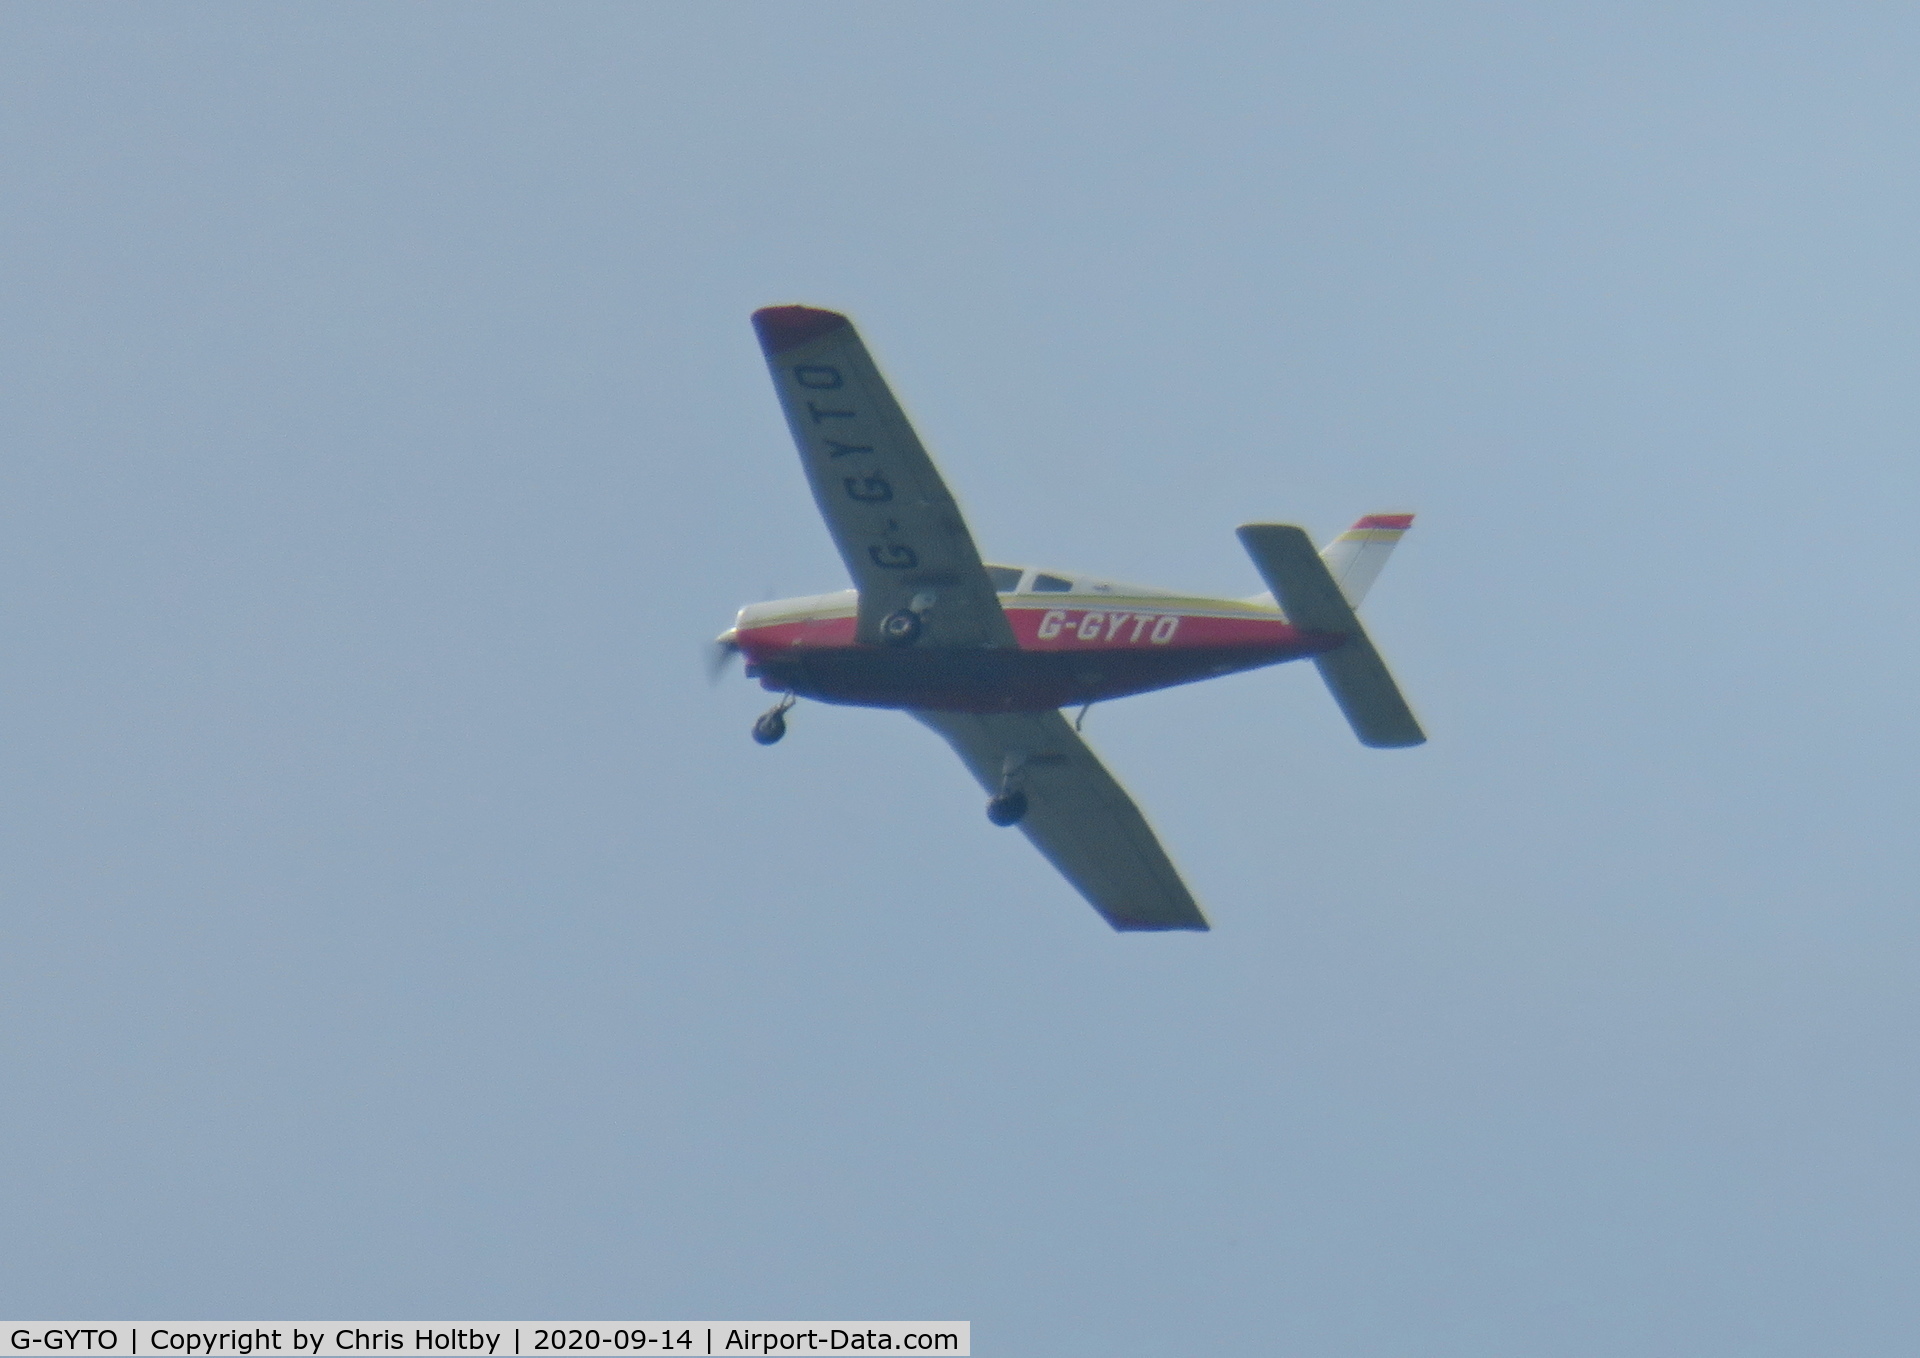 G-GYTO, 2000 Piper PA-28-161 Cherokee Warrior III C/N 2842082, Over Lower Slaughter, Cotswolds